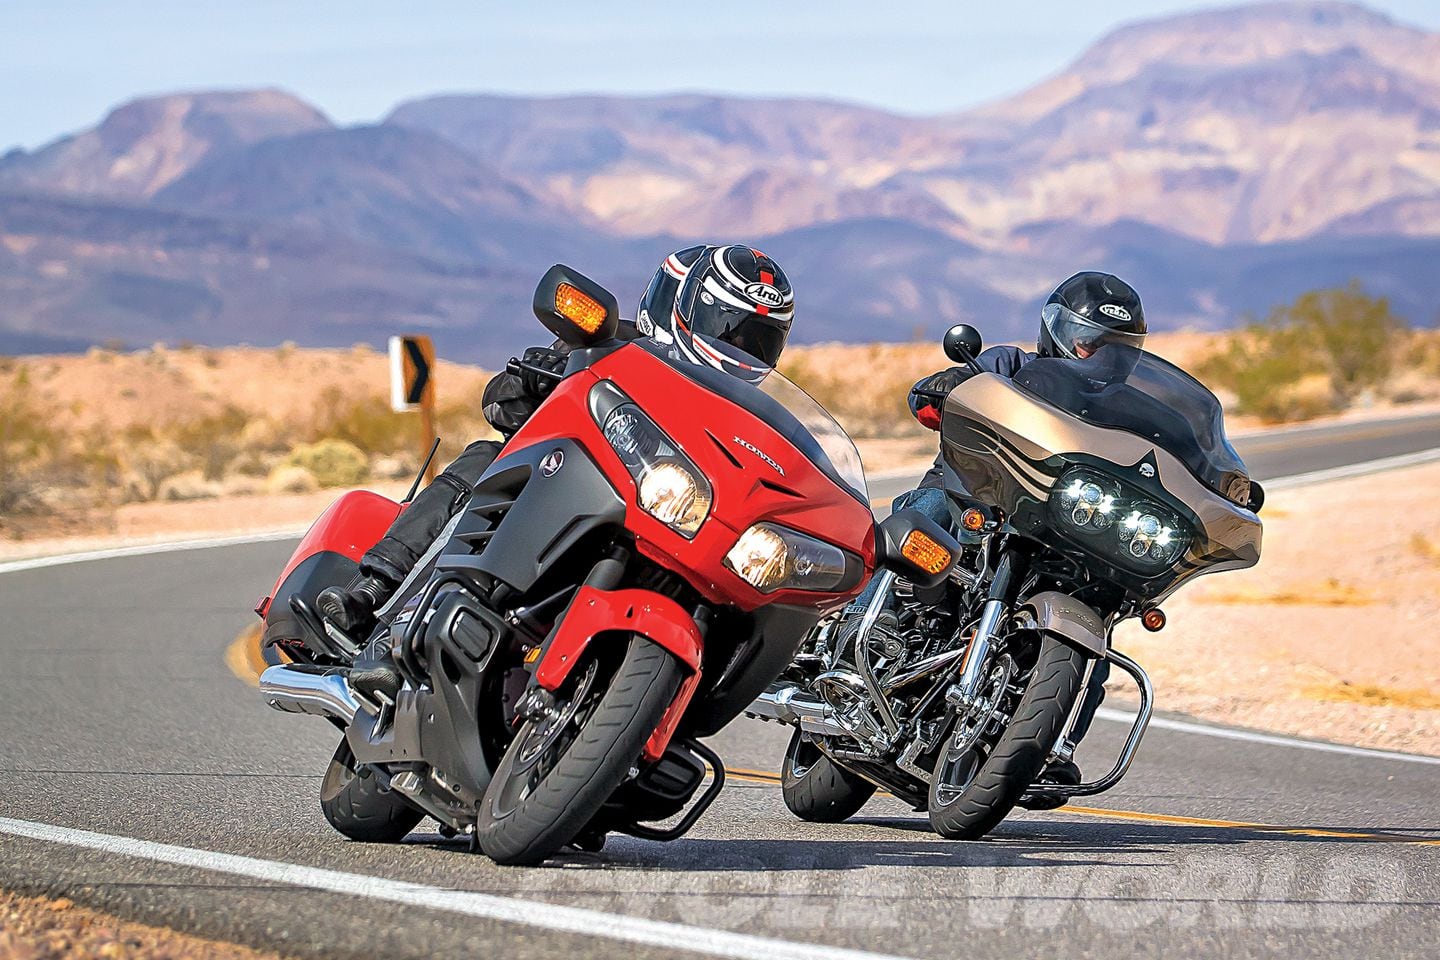 Honda Gold Wing F6b Vs H D Cvo Road Glide Comparison Test Review Cycle World